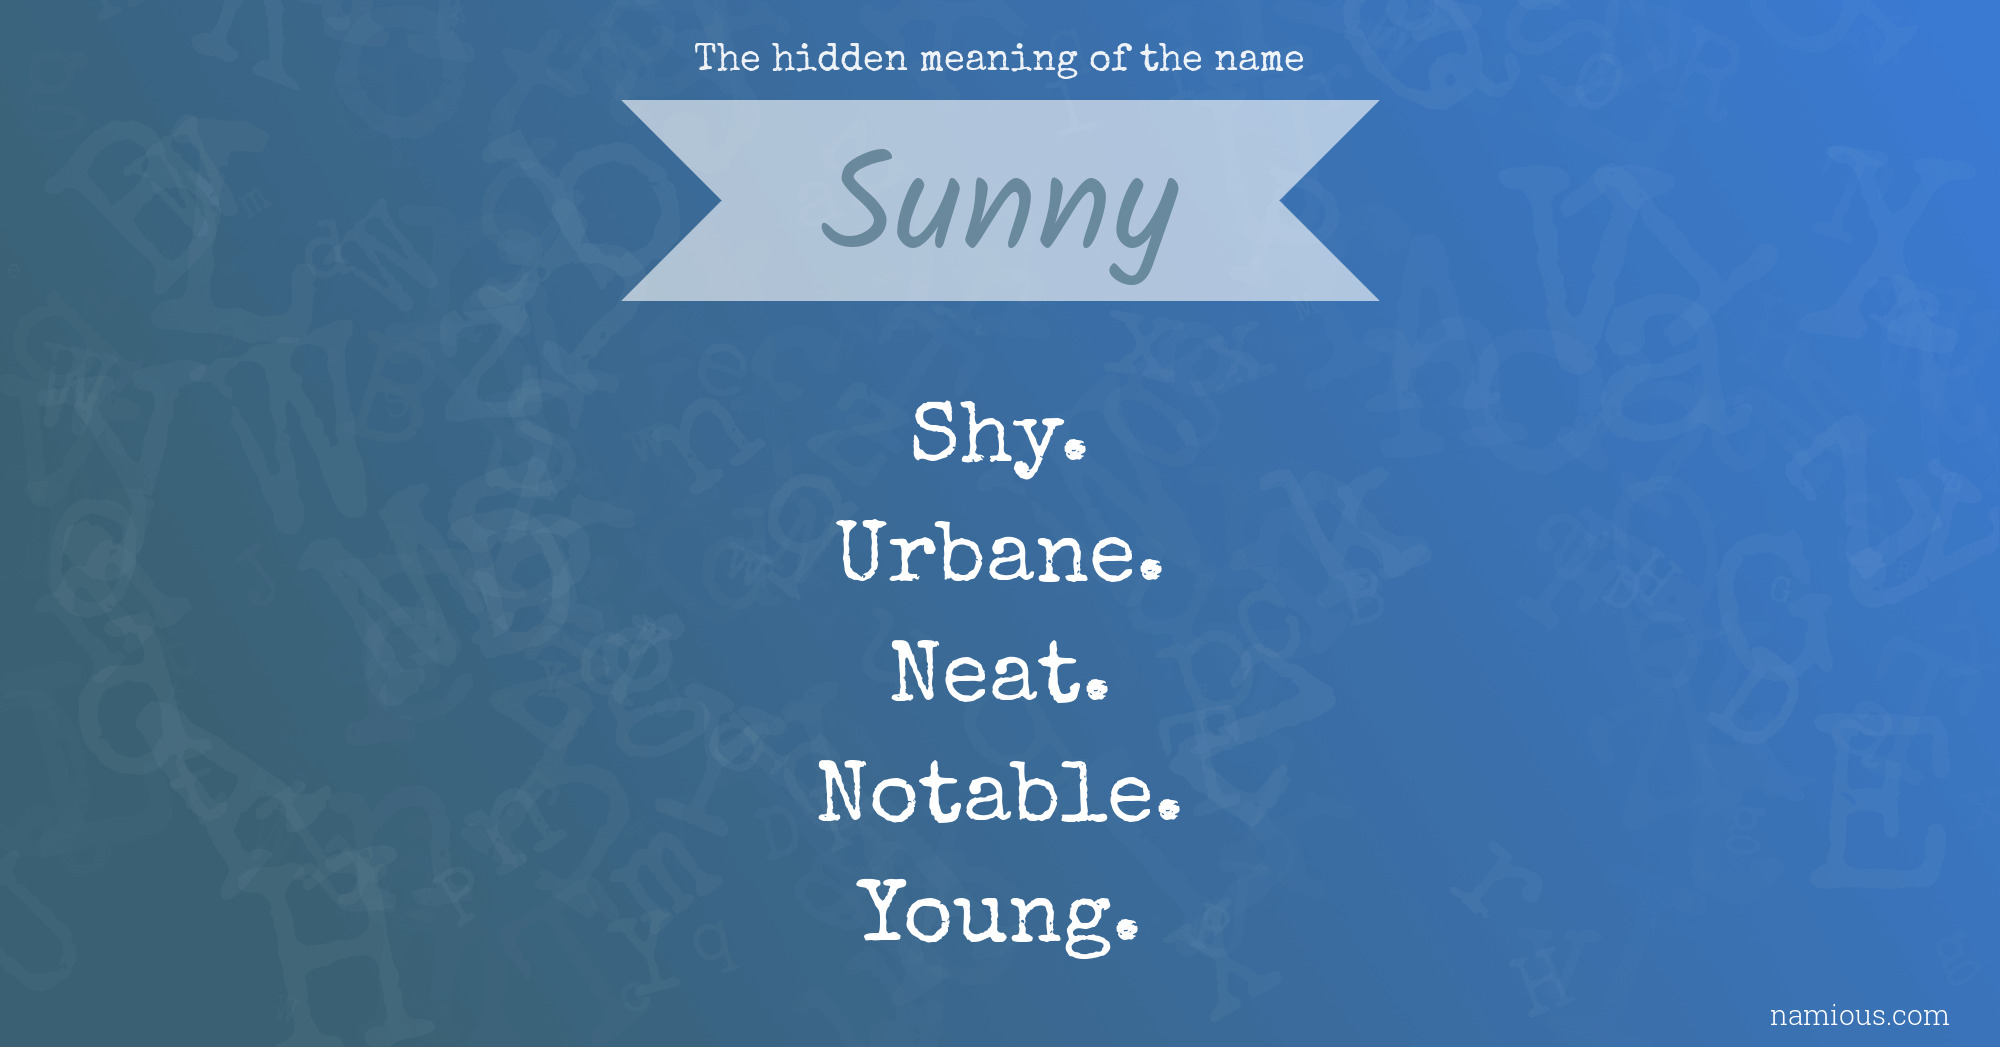 The hidden meaning of the name Sunny